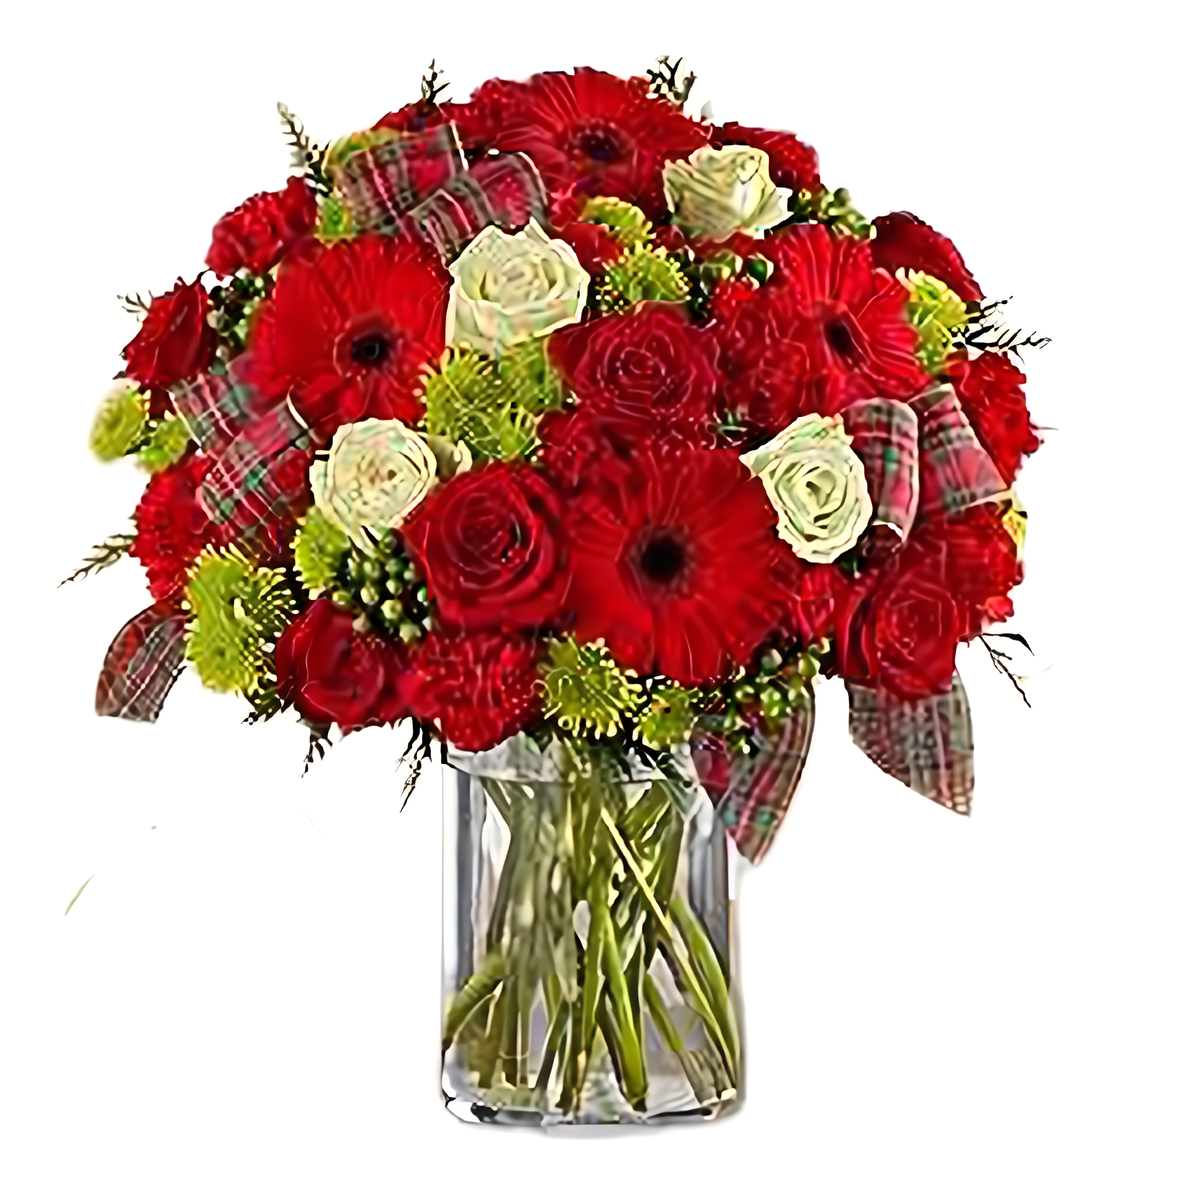 Manhattan Flower Delivery - Festive Fanfare Bouquet - Holiday Collection